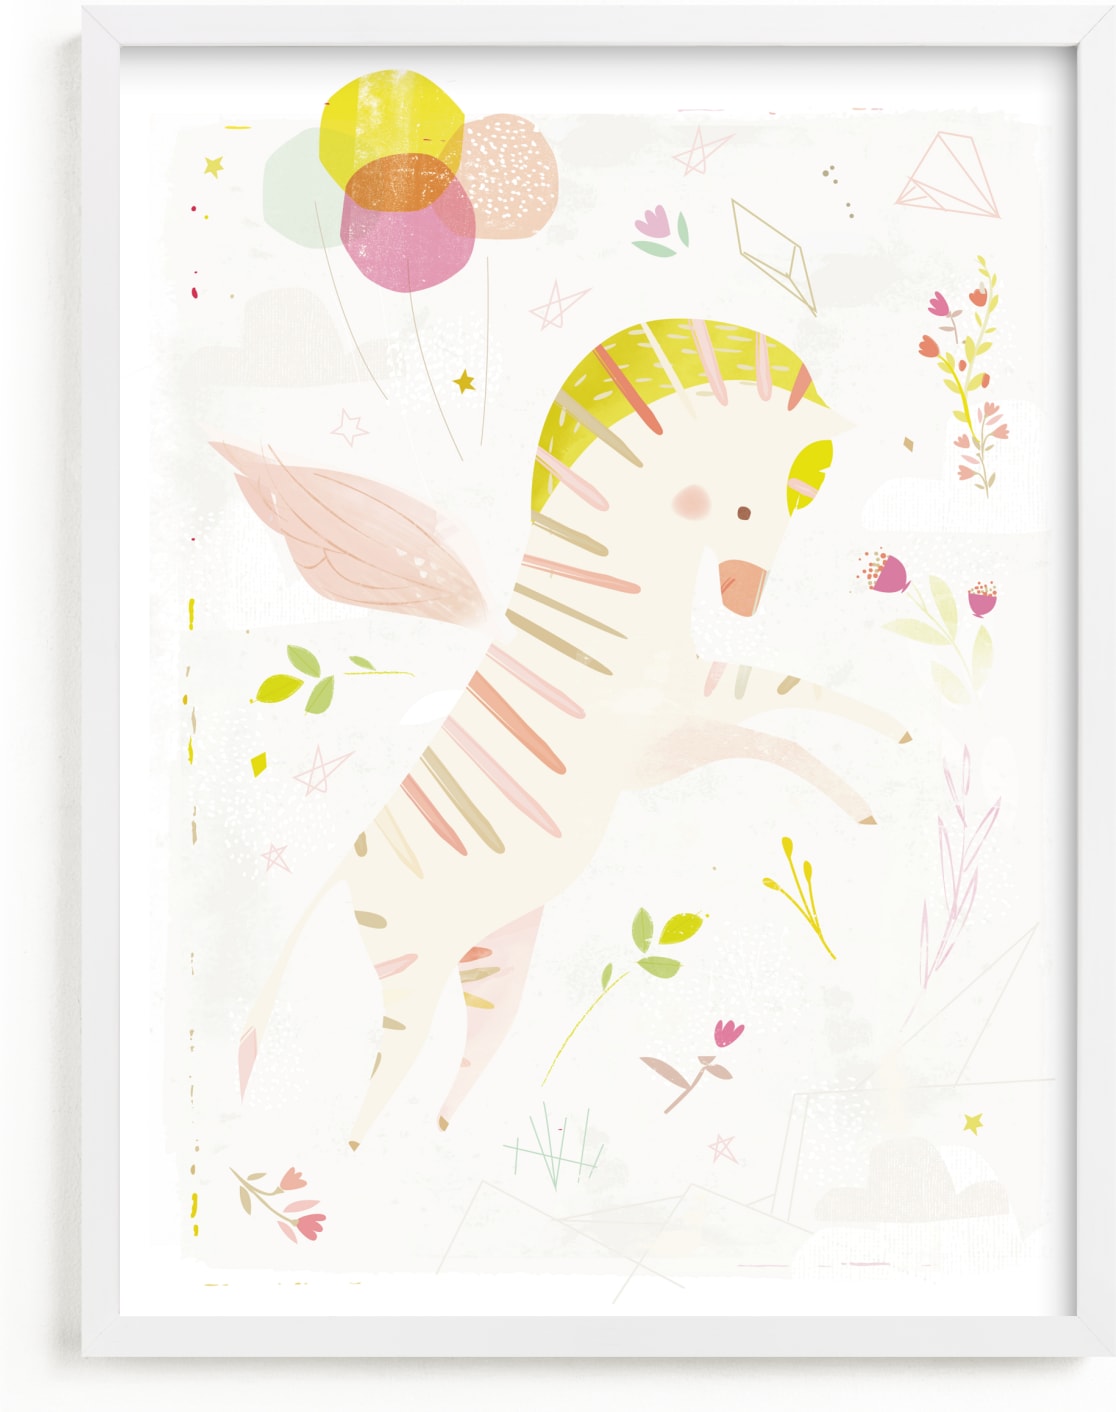 This is a colorful kids wall art by Lori Wemple called Free.